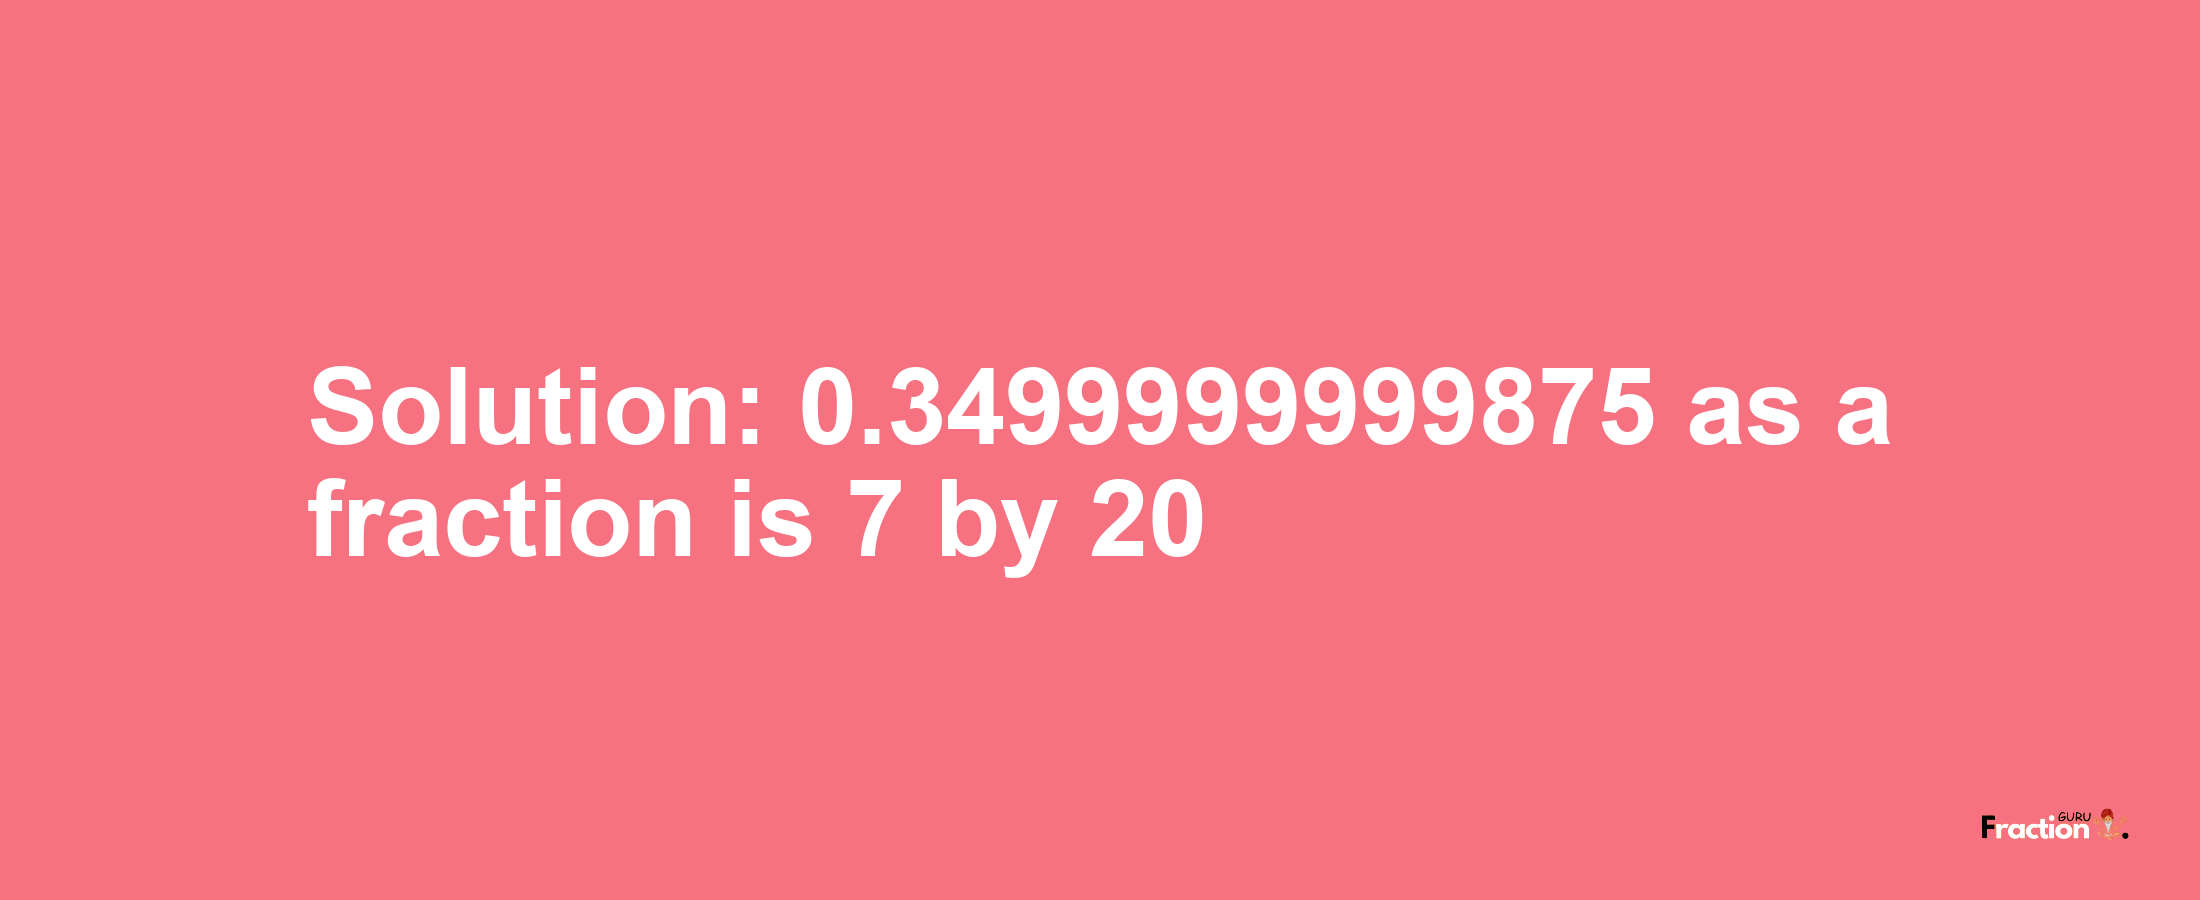 Solution:0.3499999999875 as a fraction is 7/20